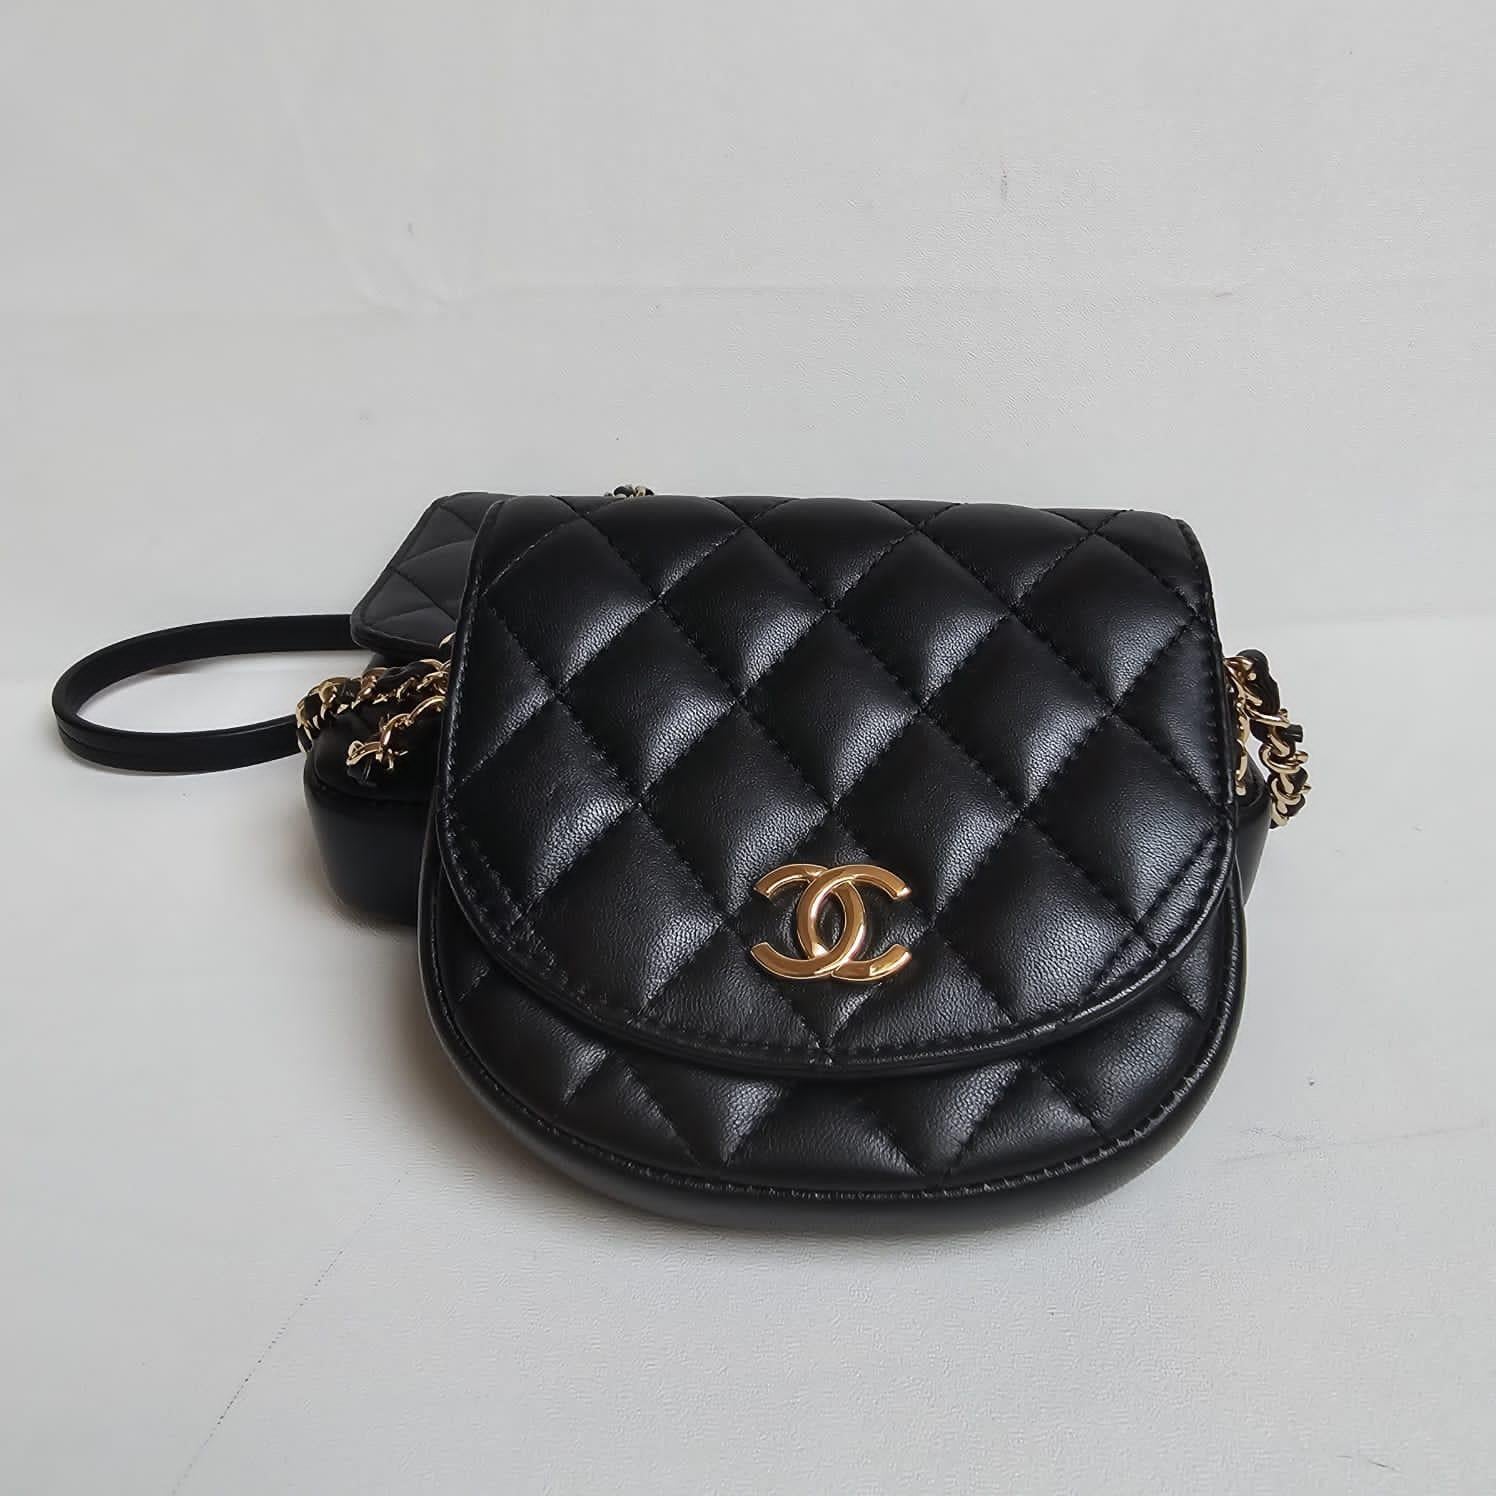 Rare Chanel Black Lambskin Quilted Side Pack Double Bag For Sale 8